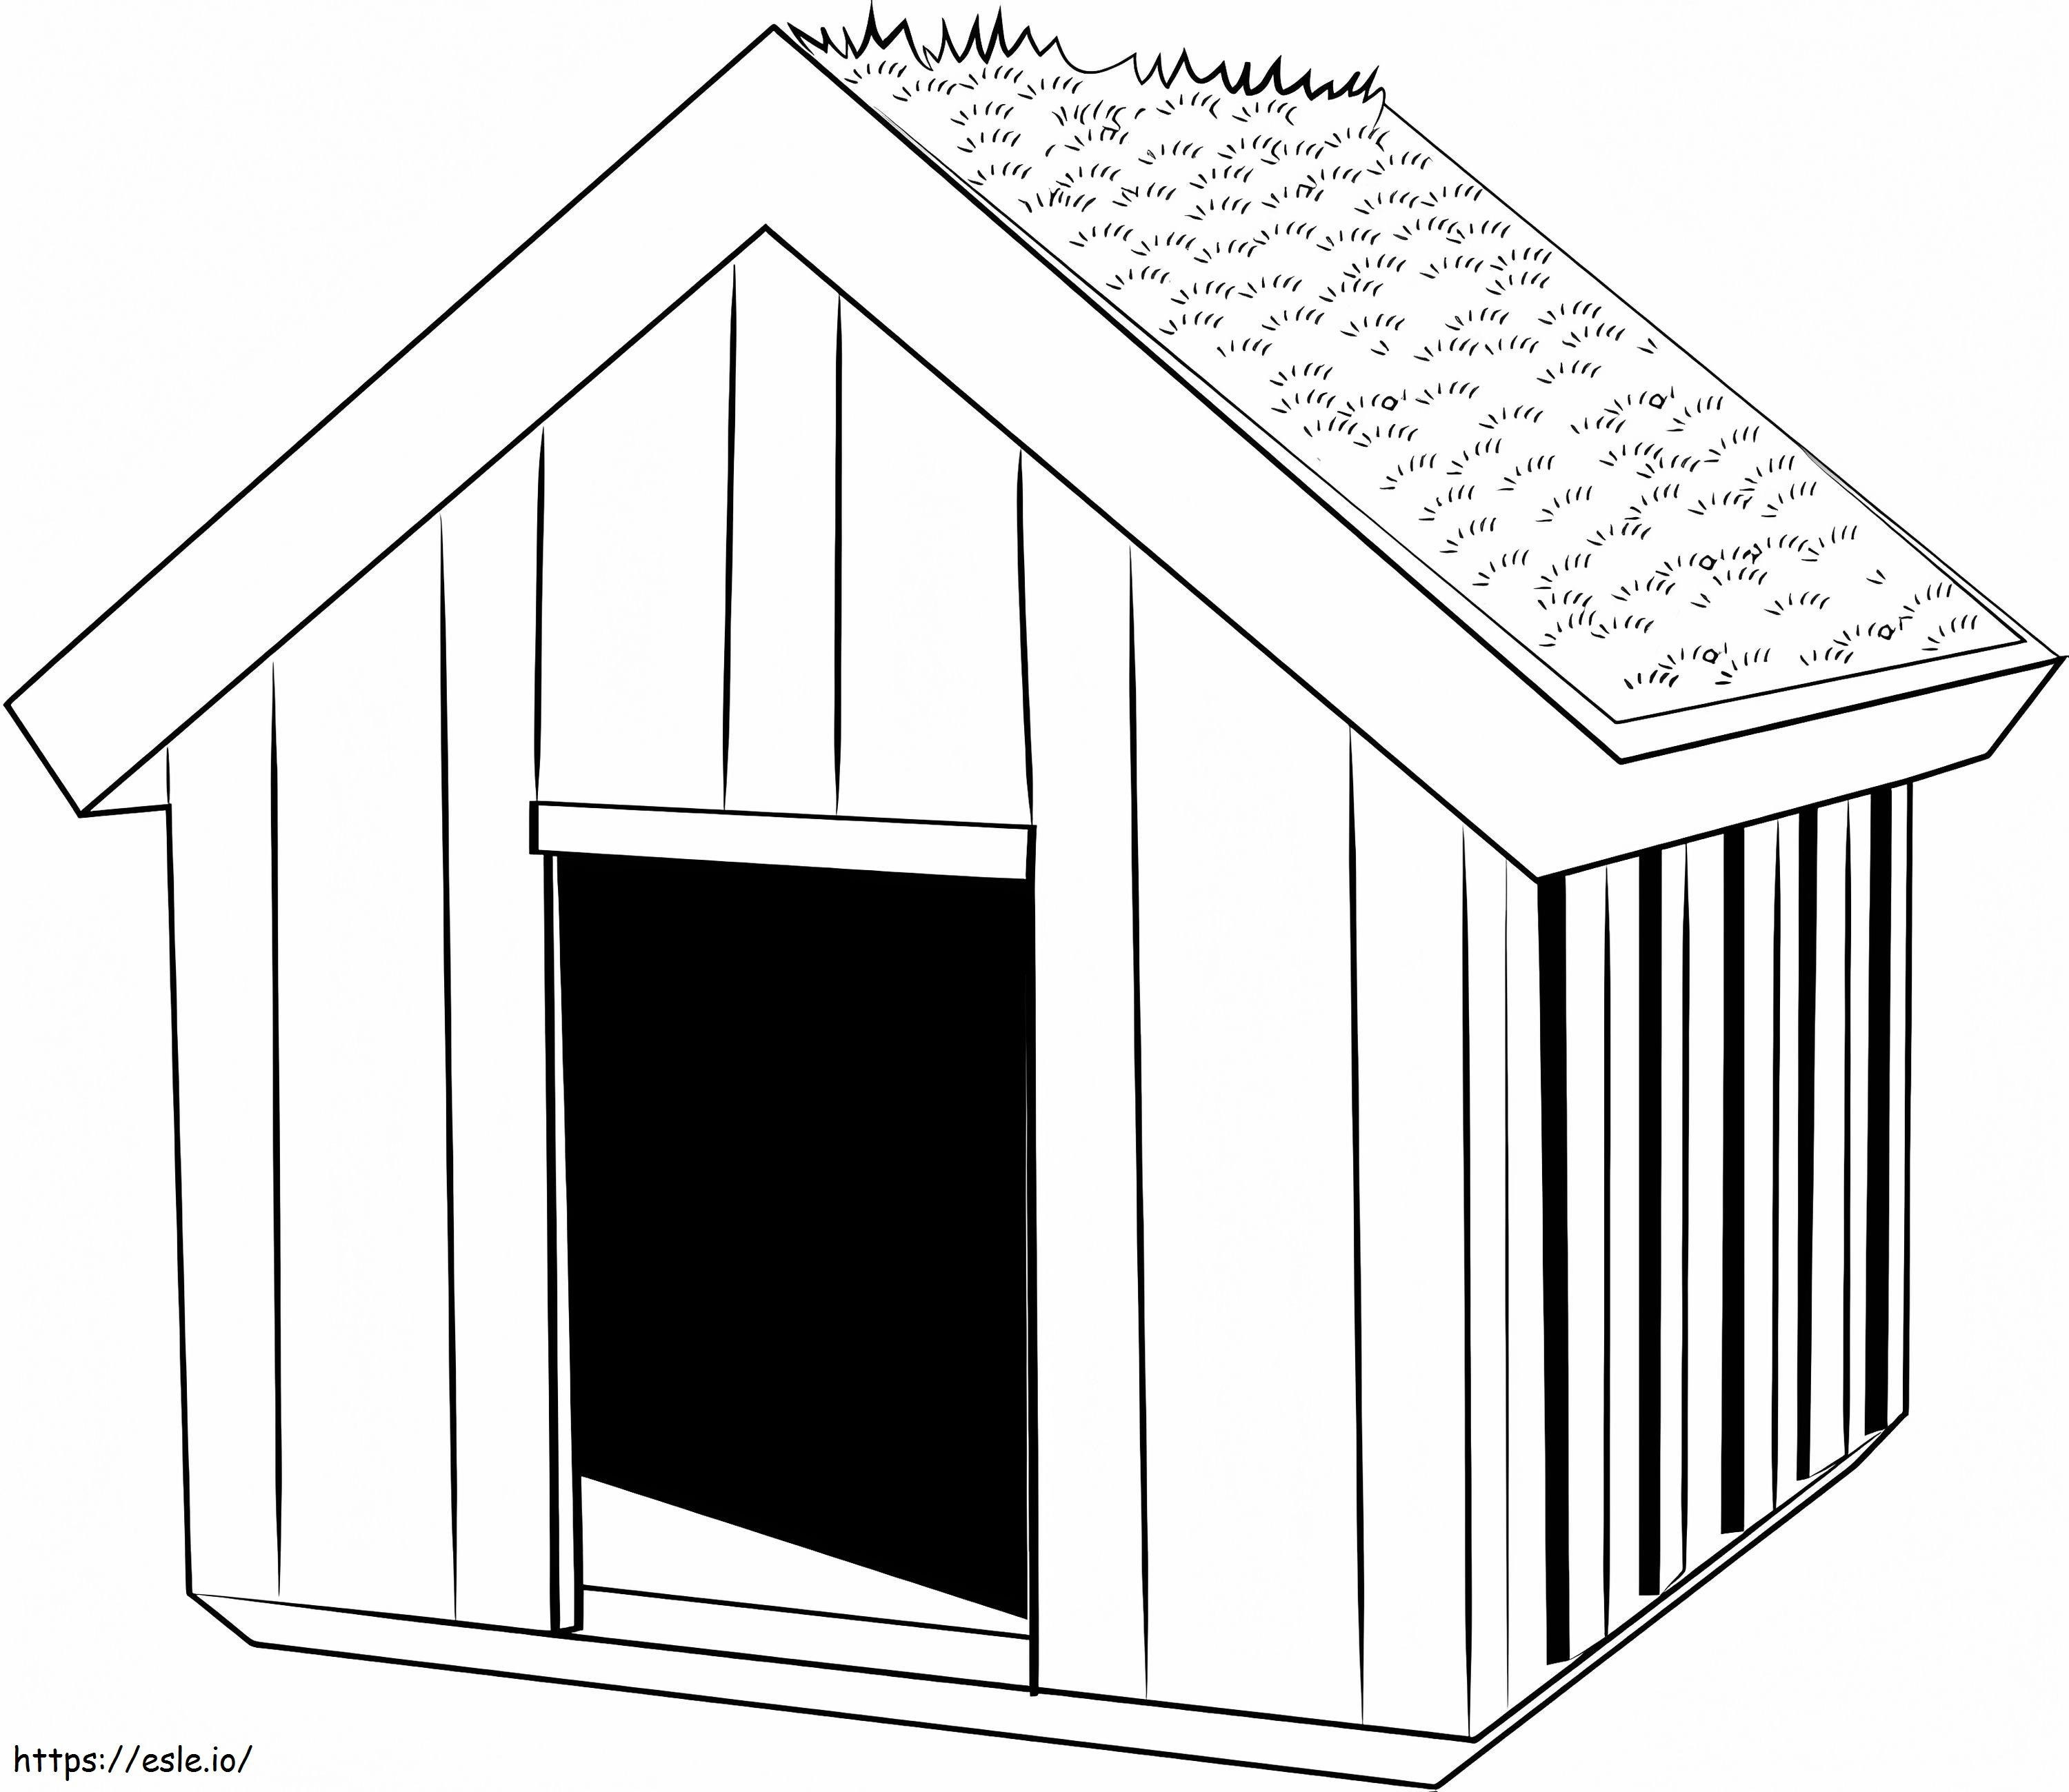 Doghouse coloring page